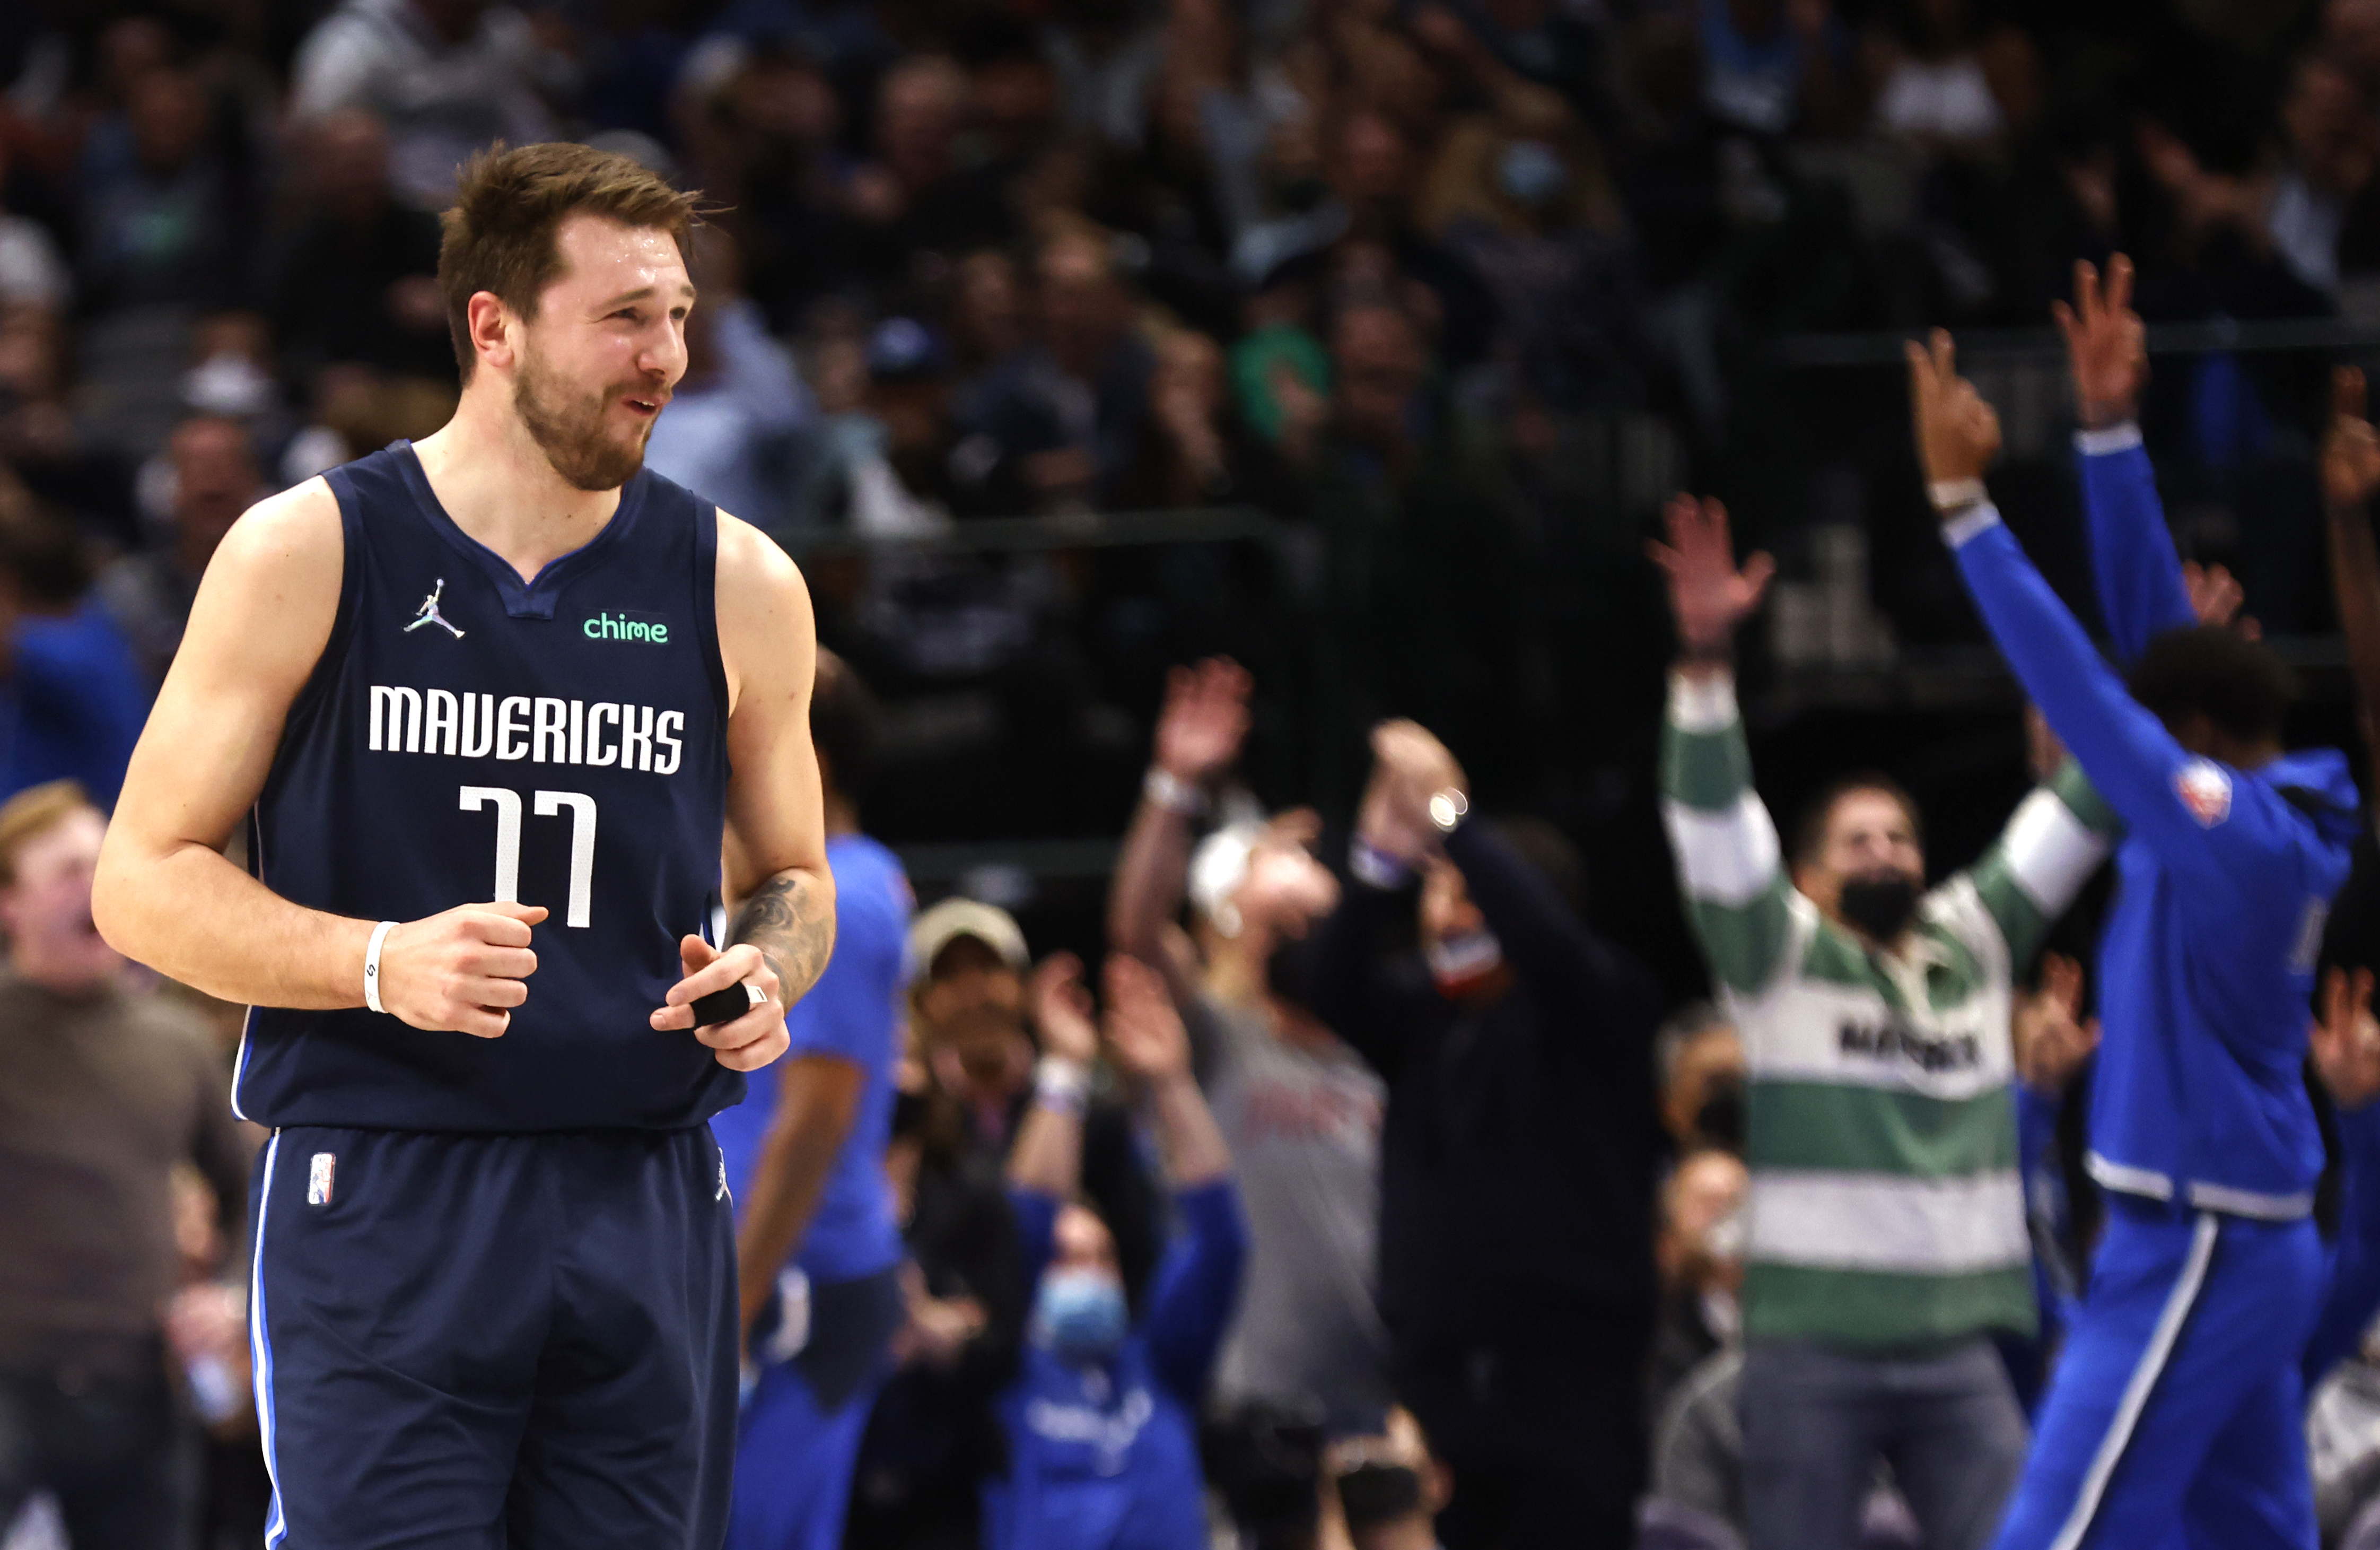 Dallas Mavericks star Luka Doncic reacts to a three-point basket during an NBA game against the Los Angeles Clippers in February 2022